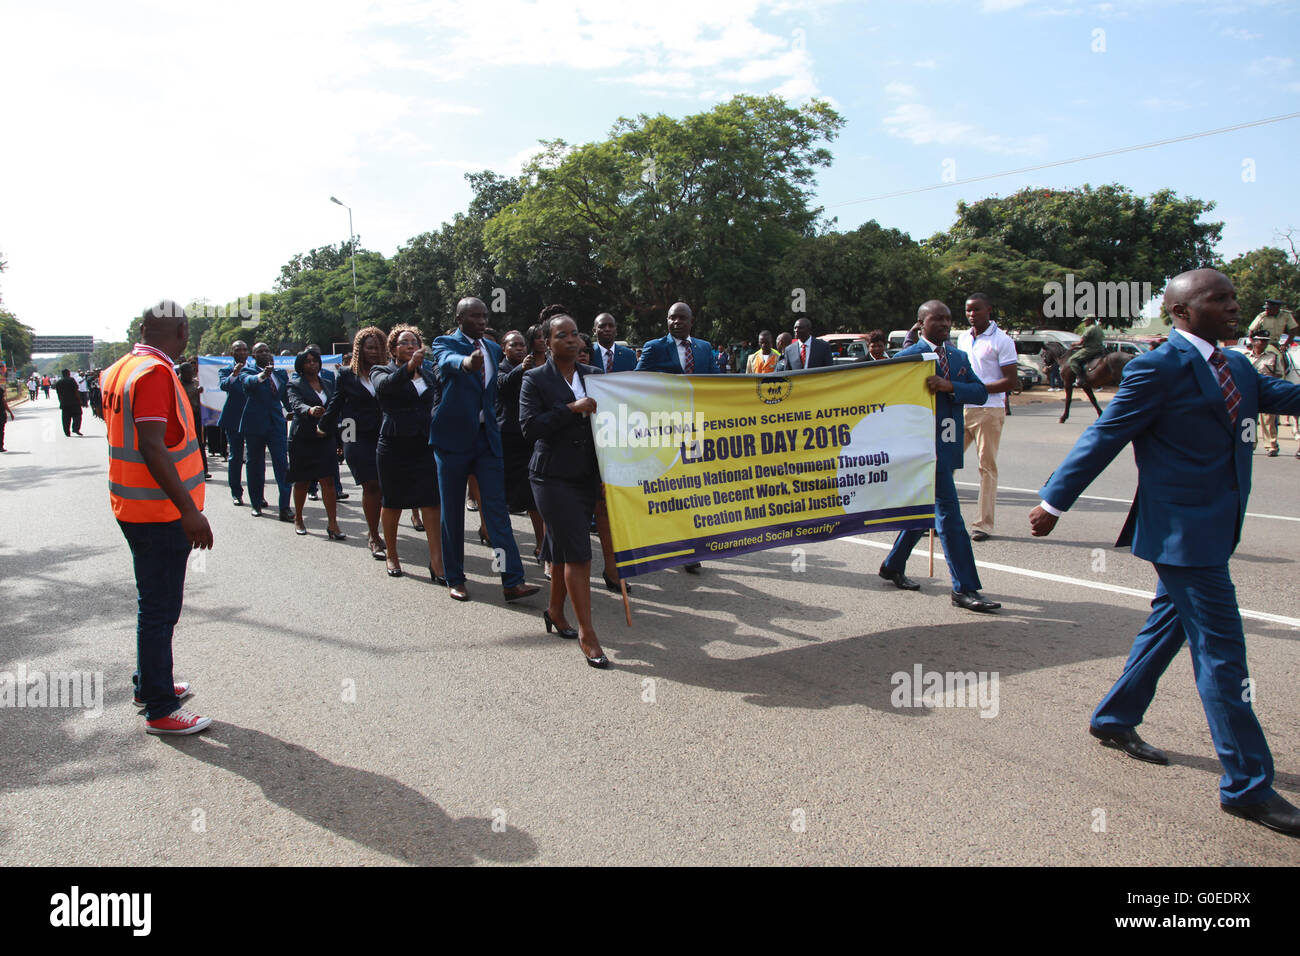 Lusaka, Zambia. 1st May, 2016. A squad from the National Pension Scheme Authority take part in the Labour Day parade in Lusaka, Zambia, May 1, 2016. © Peng Lijun/Xinhua/Alamy Live News Stock Photo